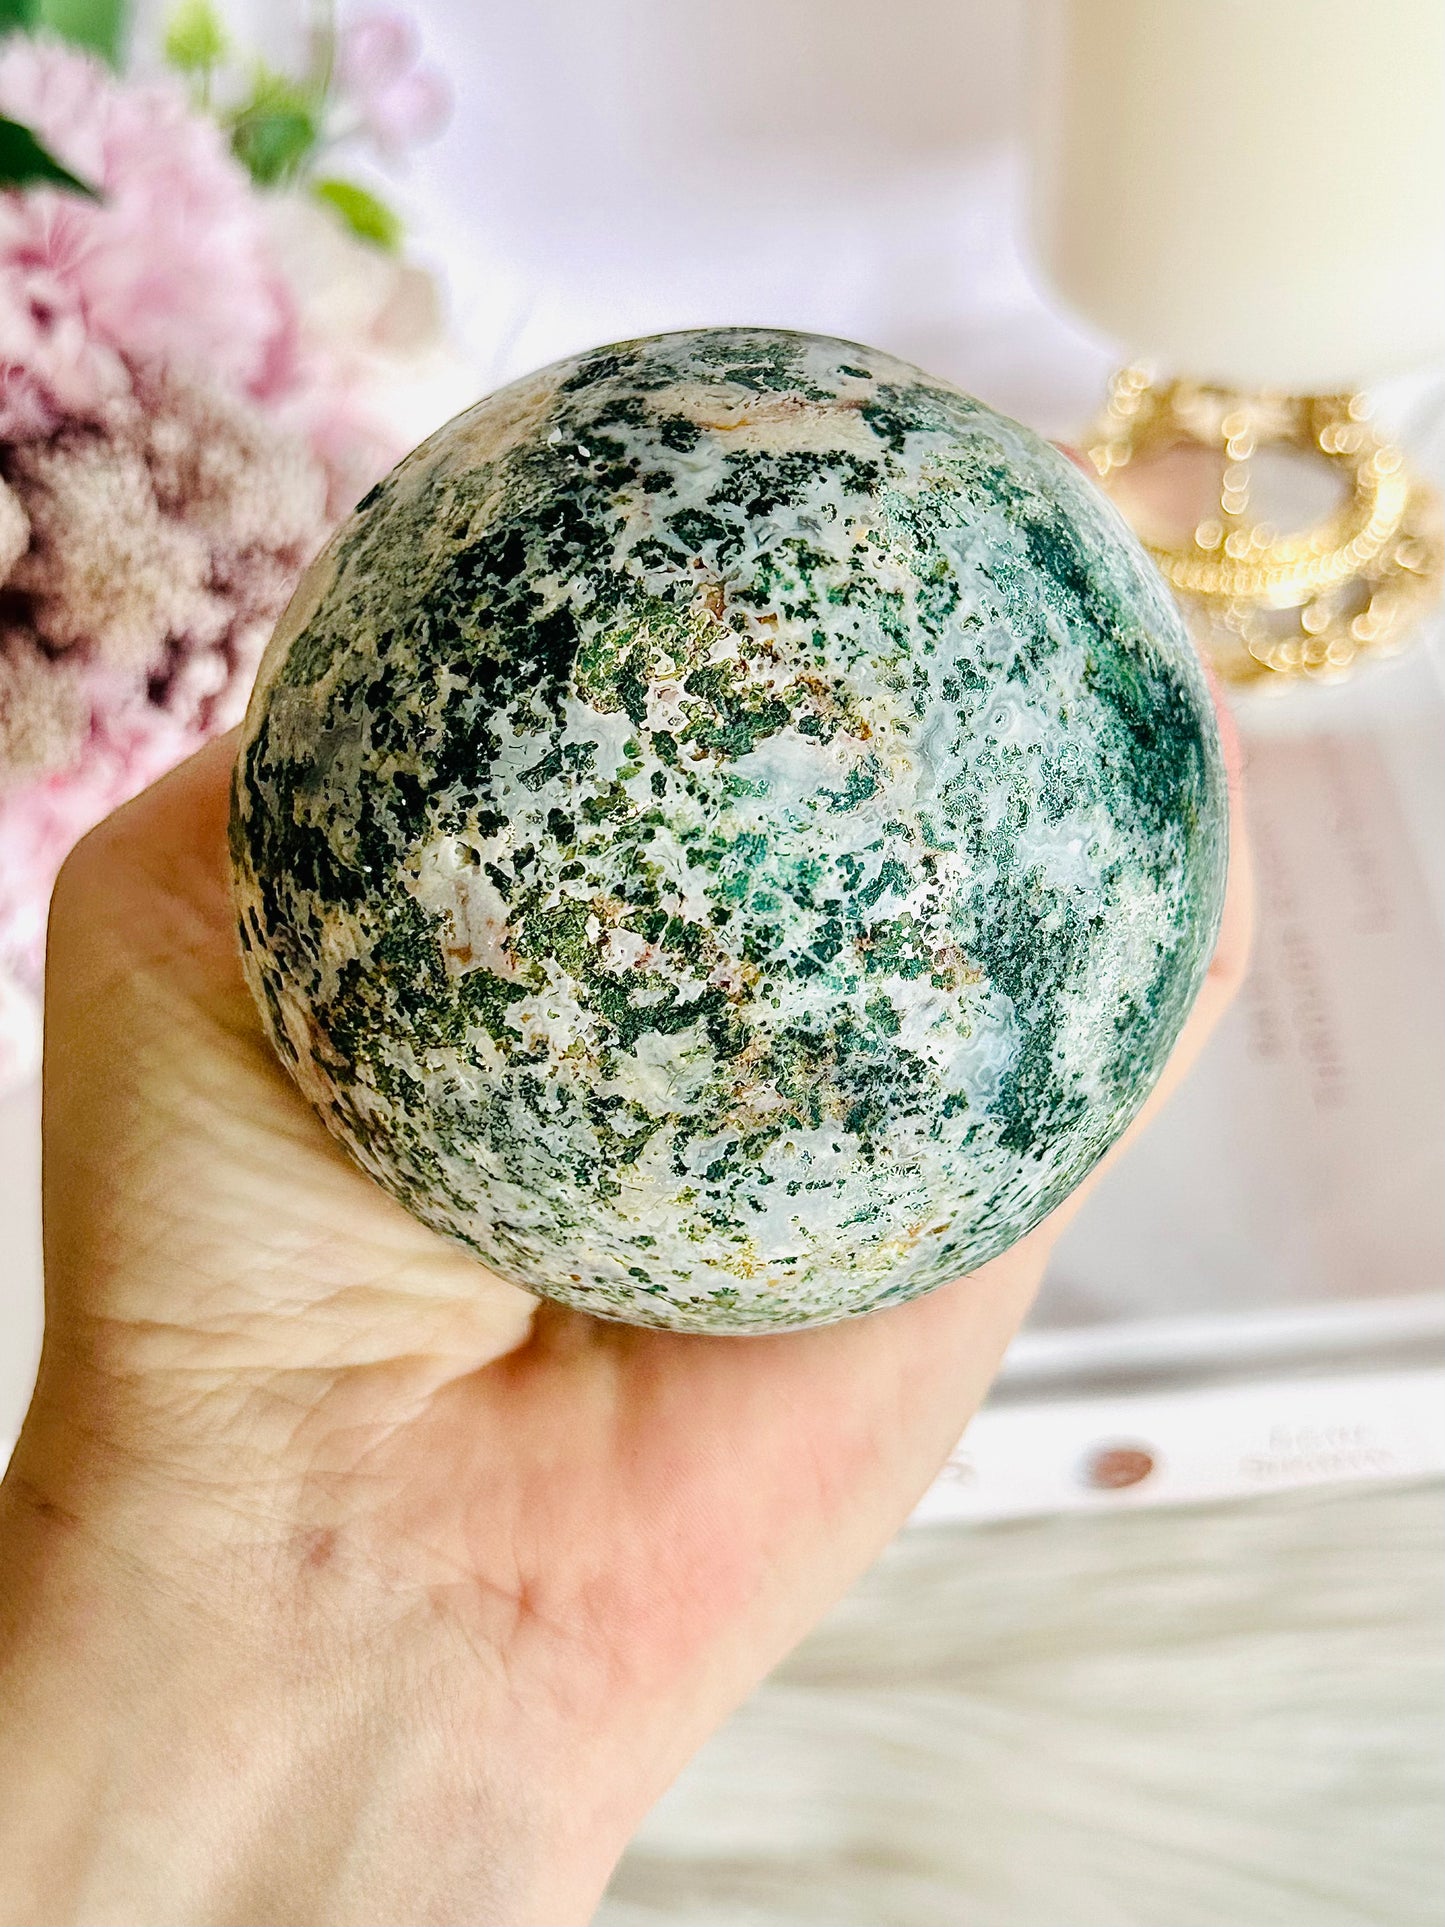 Stunning Large Druzy Pink Amethyst Sphere 569gram 8cm With Moss Agate Inclusions On Stand From Brazil